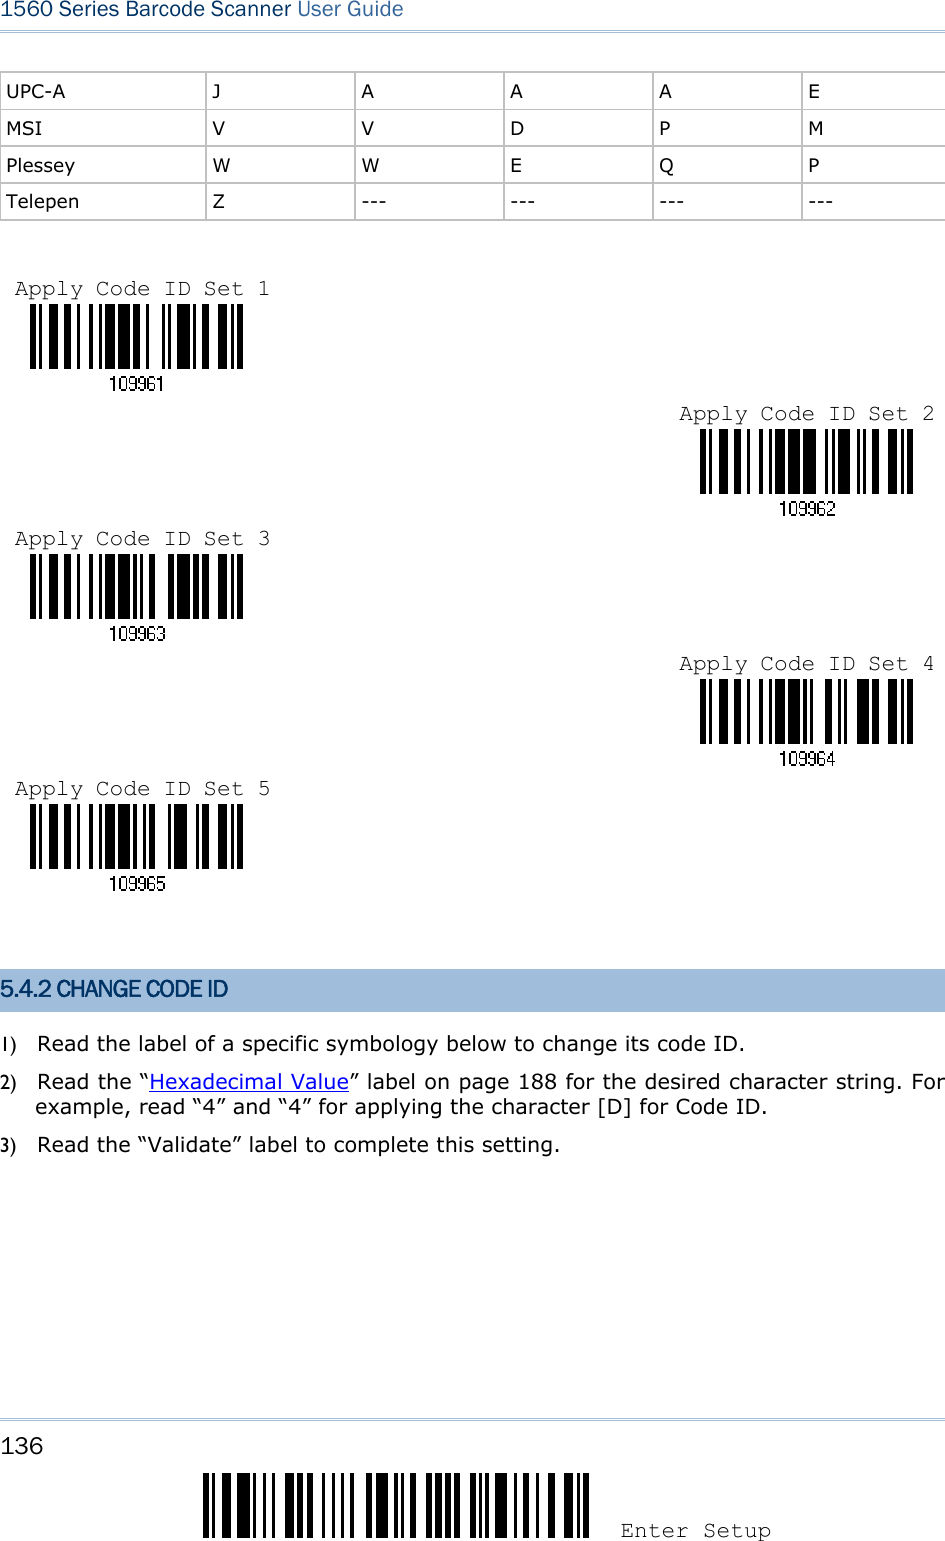 136 Enter Setup 1560 Series Barcode Scanner User Guide  UPC-A  J  A A A E MSI V V D P M Plessey W W E Q P Telepen  Z  --- --- --- ---          5.4.2 CHANGE CODE ID 1) Read the label of a specific symbology below to change its code ID. 2) Read the “Hexadecimal Value” label on page 188 for the desired character string. For example, read “4” and “4” for applying the character [D] for Code ID. 3) Read the “Validate” label to complete this setting. Apply Code ID Set 1 Apply Code ID Set 2Apply Code ID Set 3 Apply Code ID Set 4Apply Code ID Set 5 